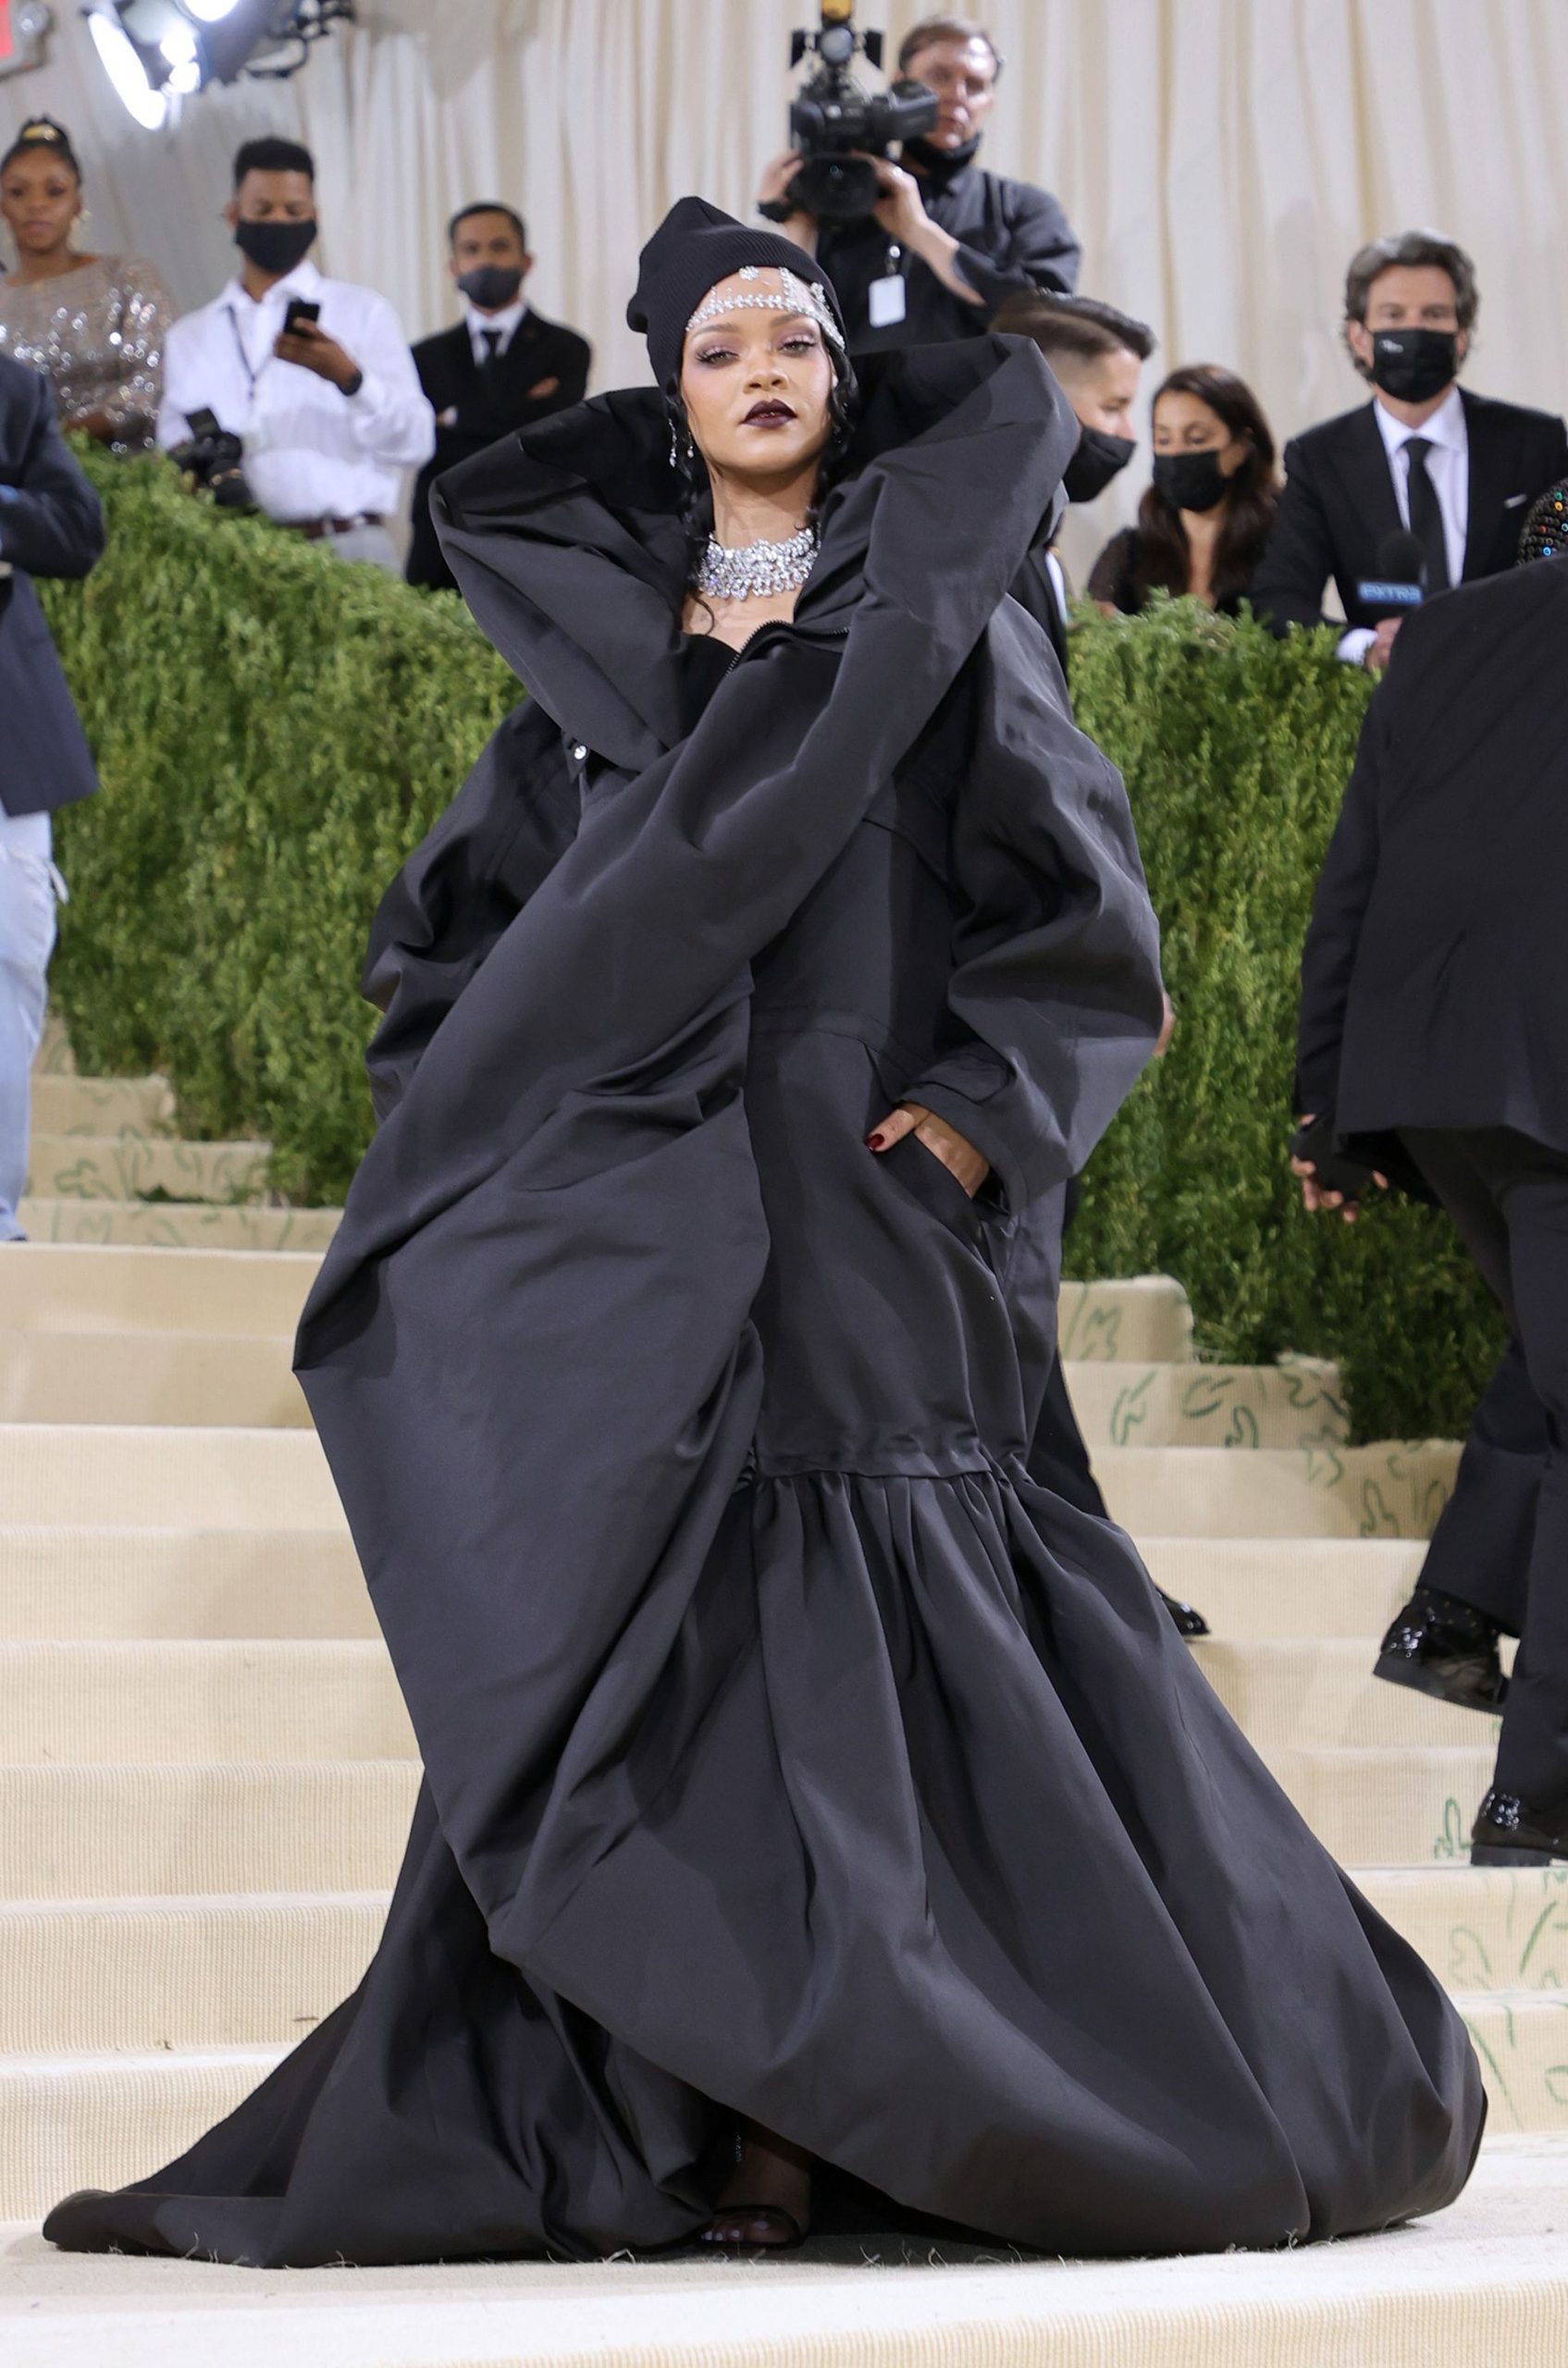 What They Wore: MET Gala 2021 Outfits